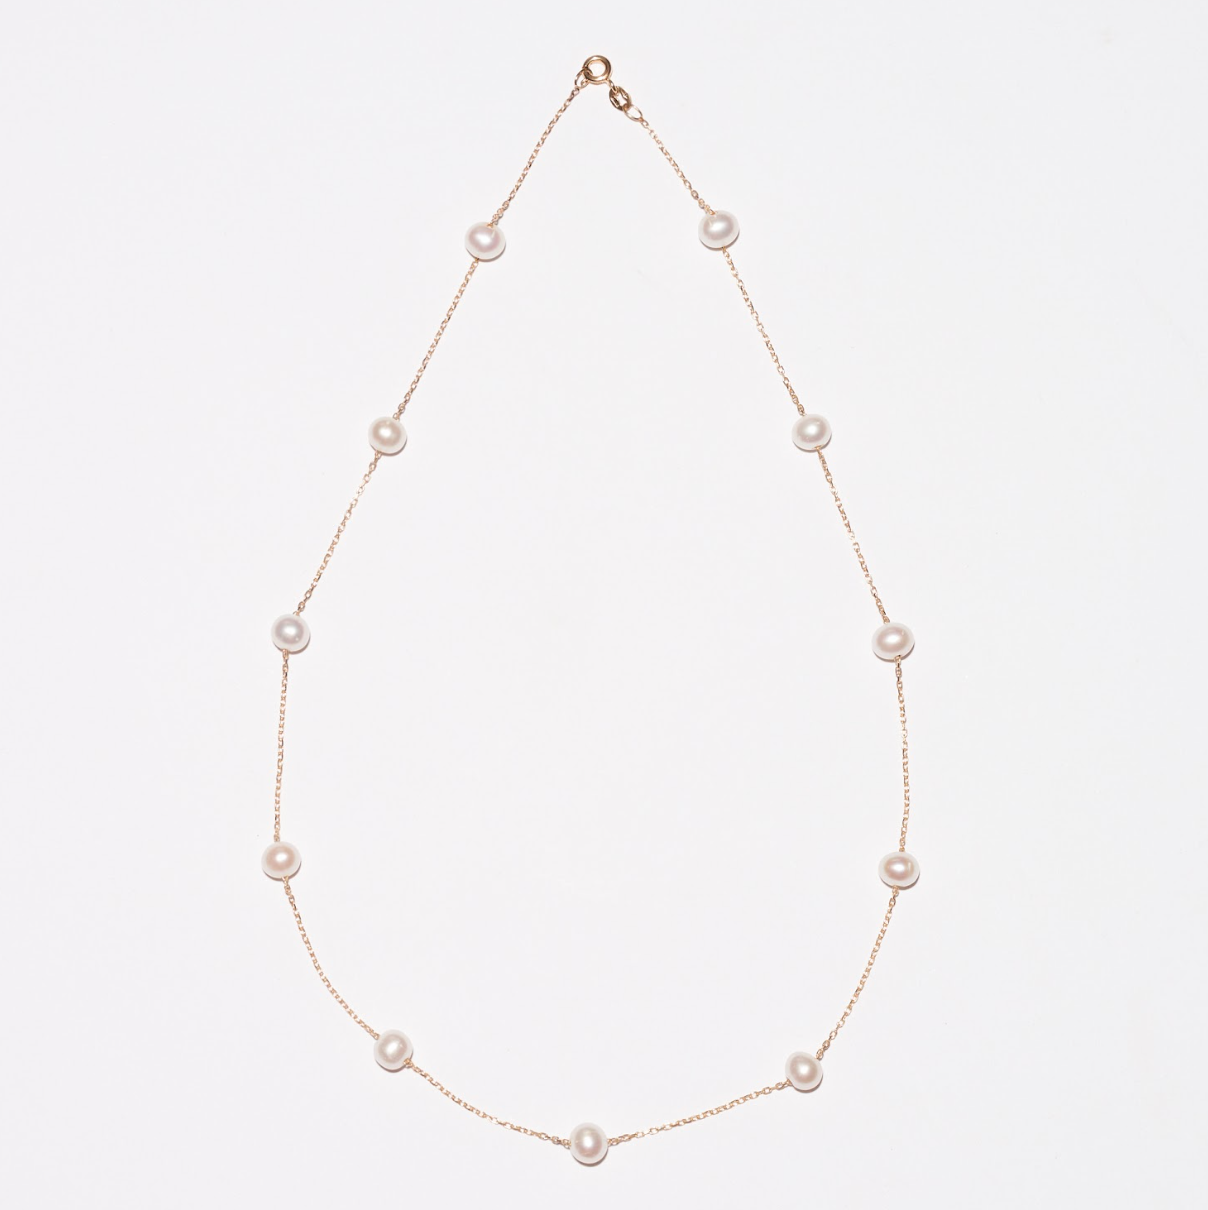 45cm Gold-Plated Pearl Station Necklace with White Pearls